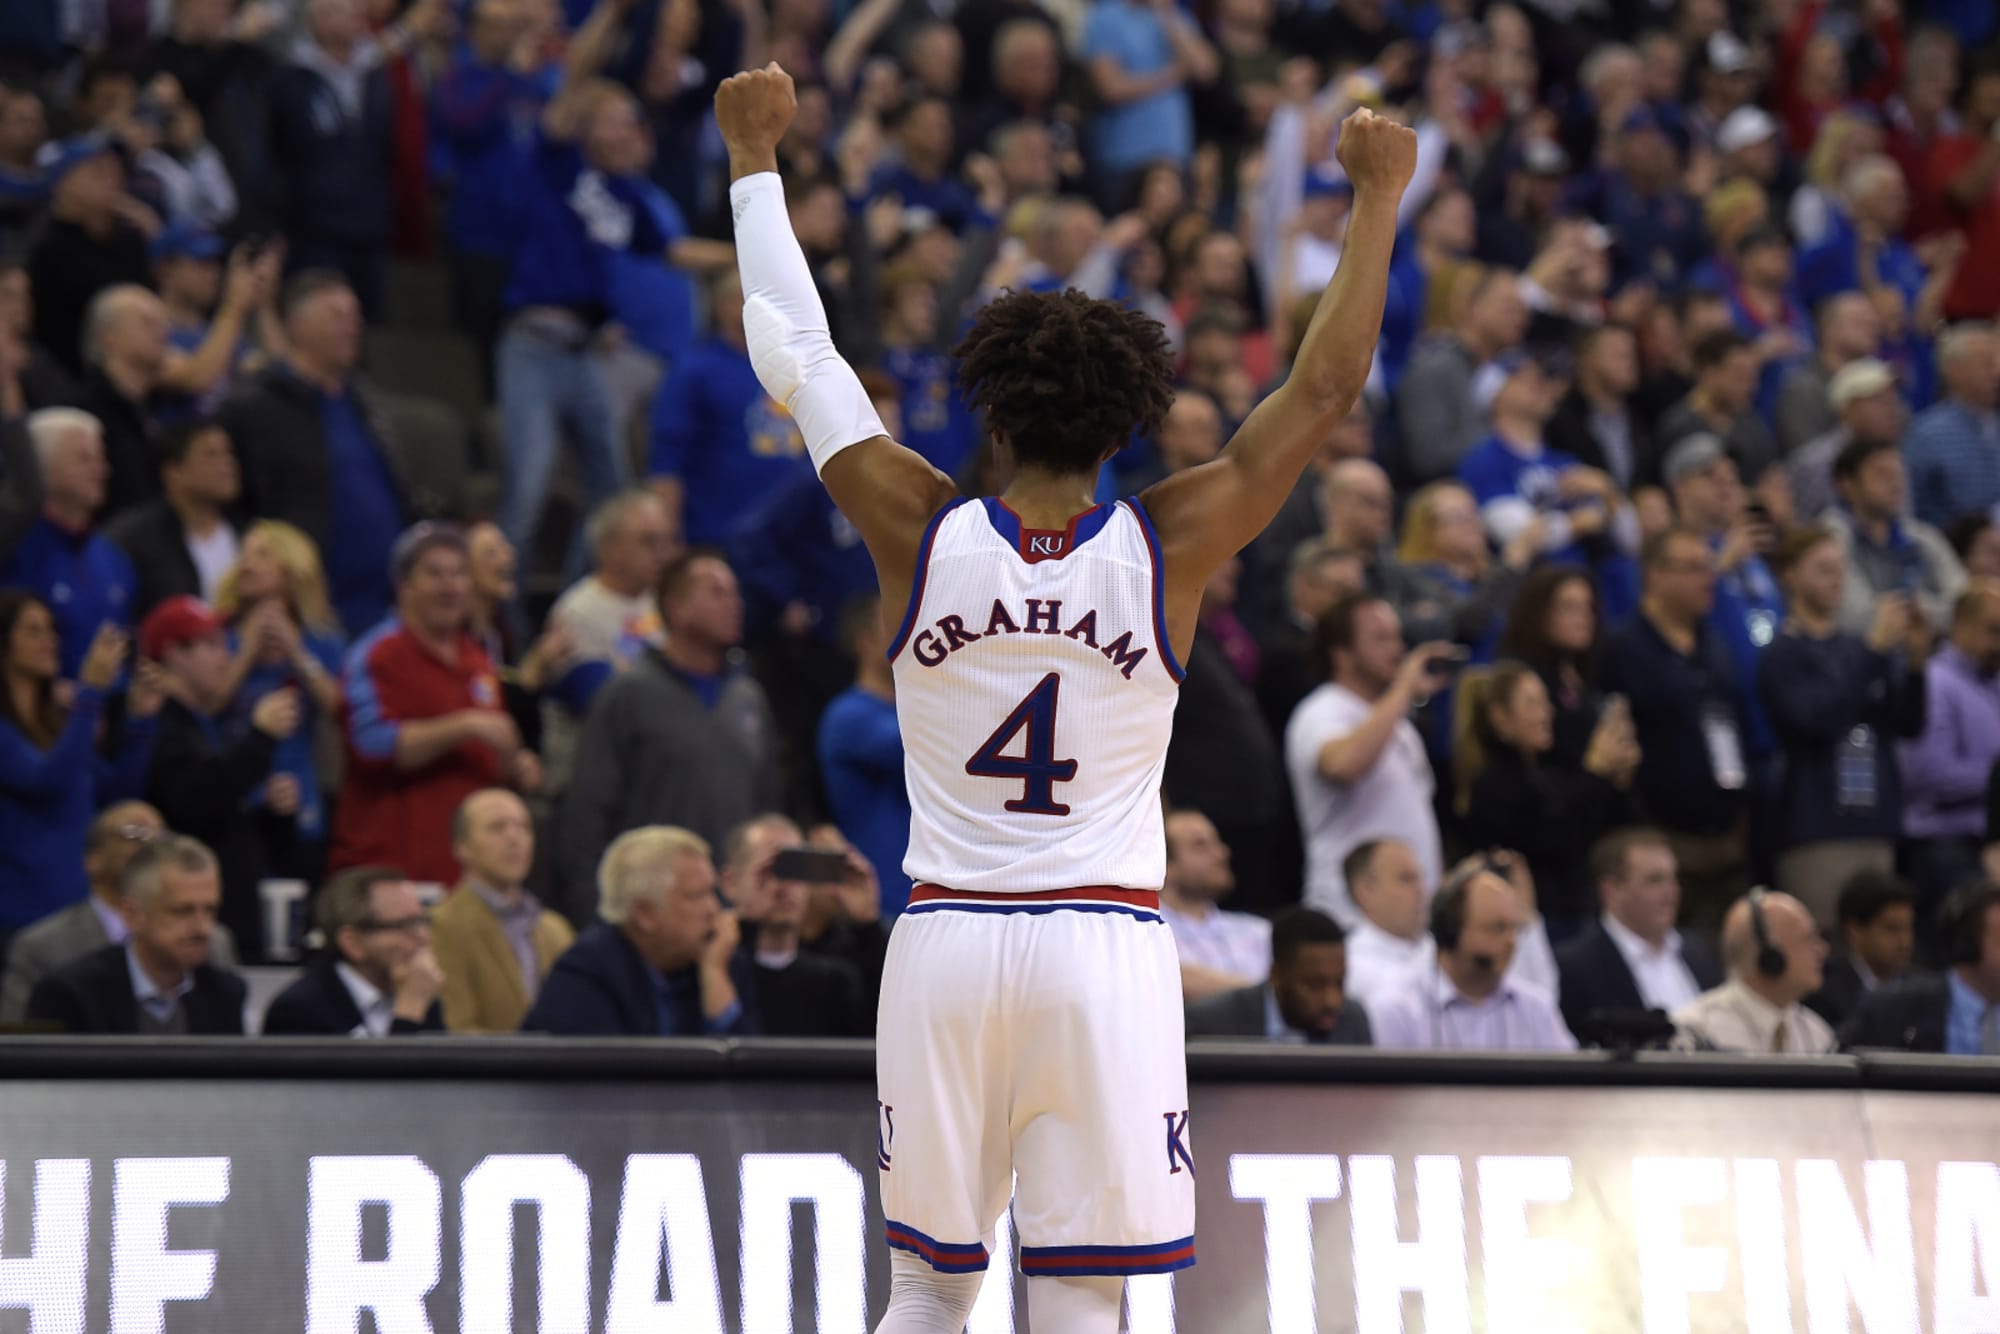 Why Devonte' Graham won Big 12 Player of the Year honors over